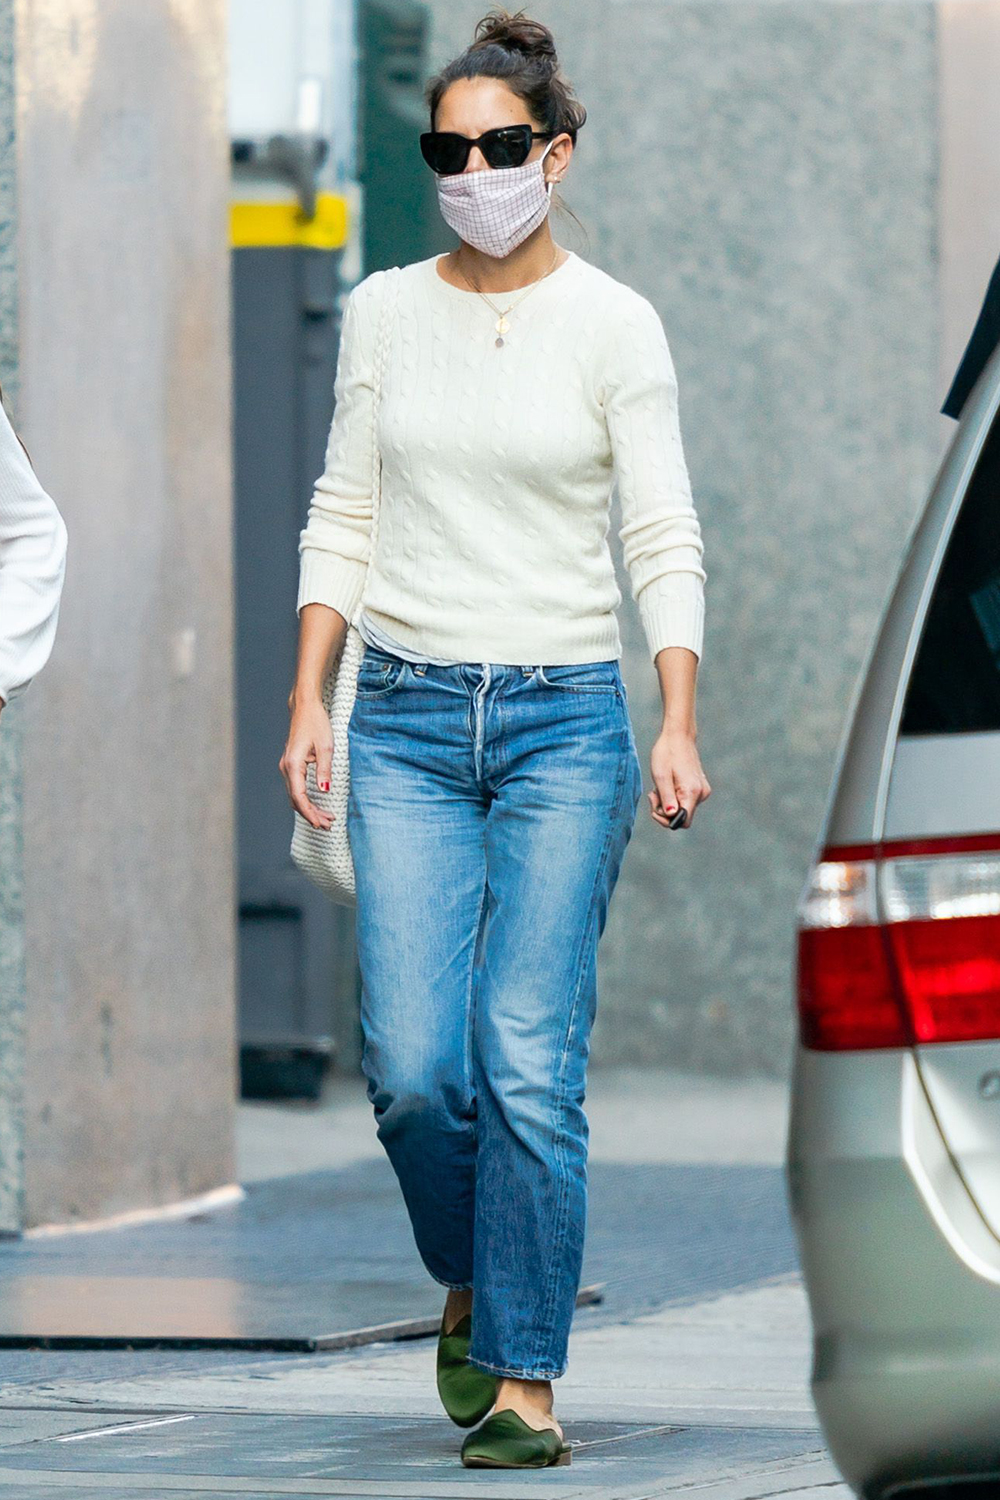 Katie Holmes Has Convinced Us to Try This 2021 Footwear Trend